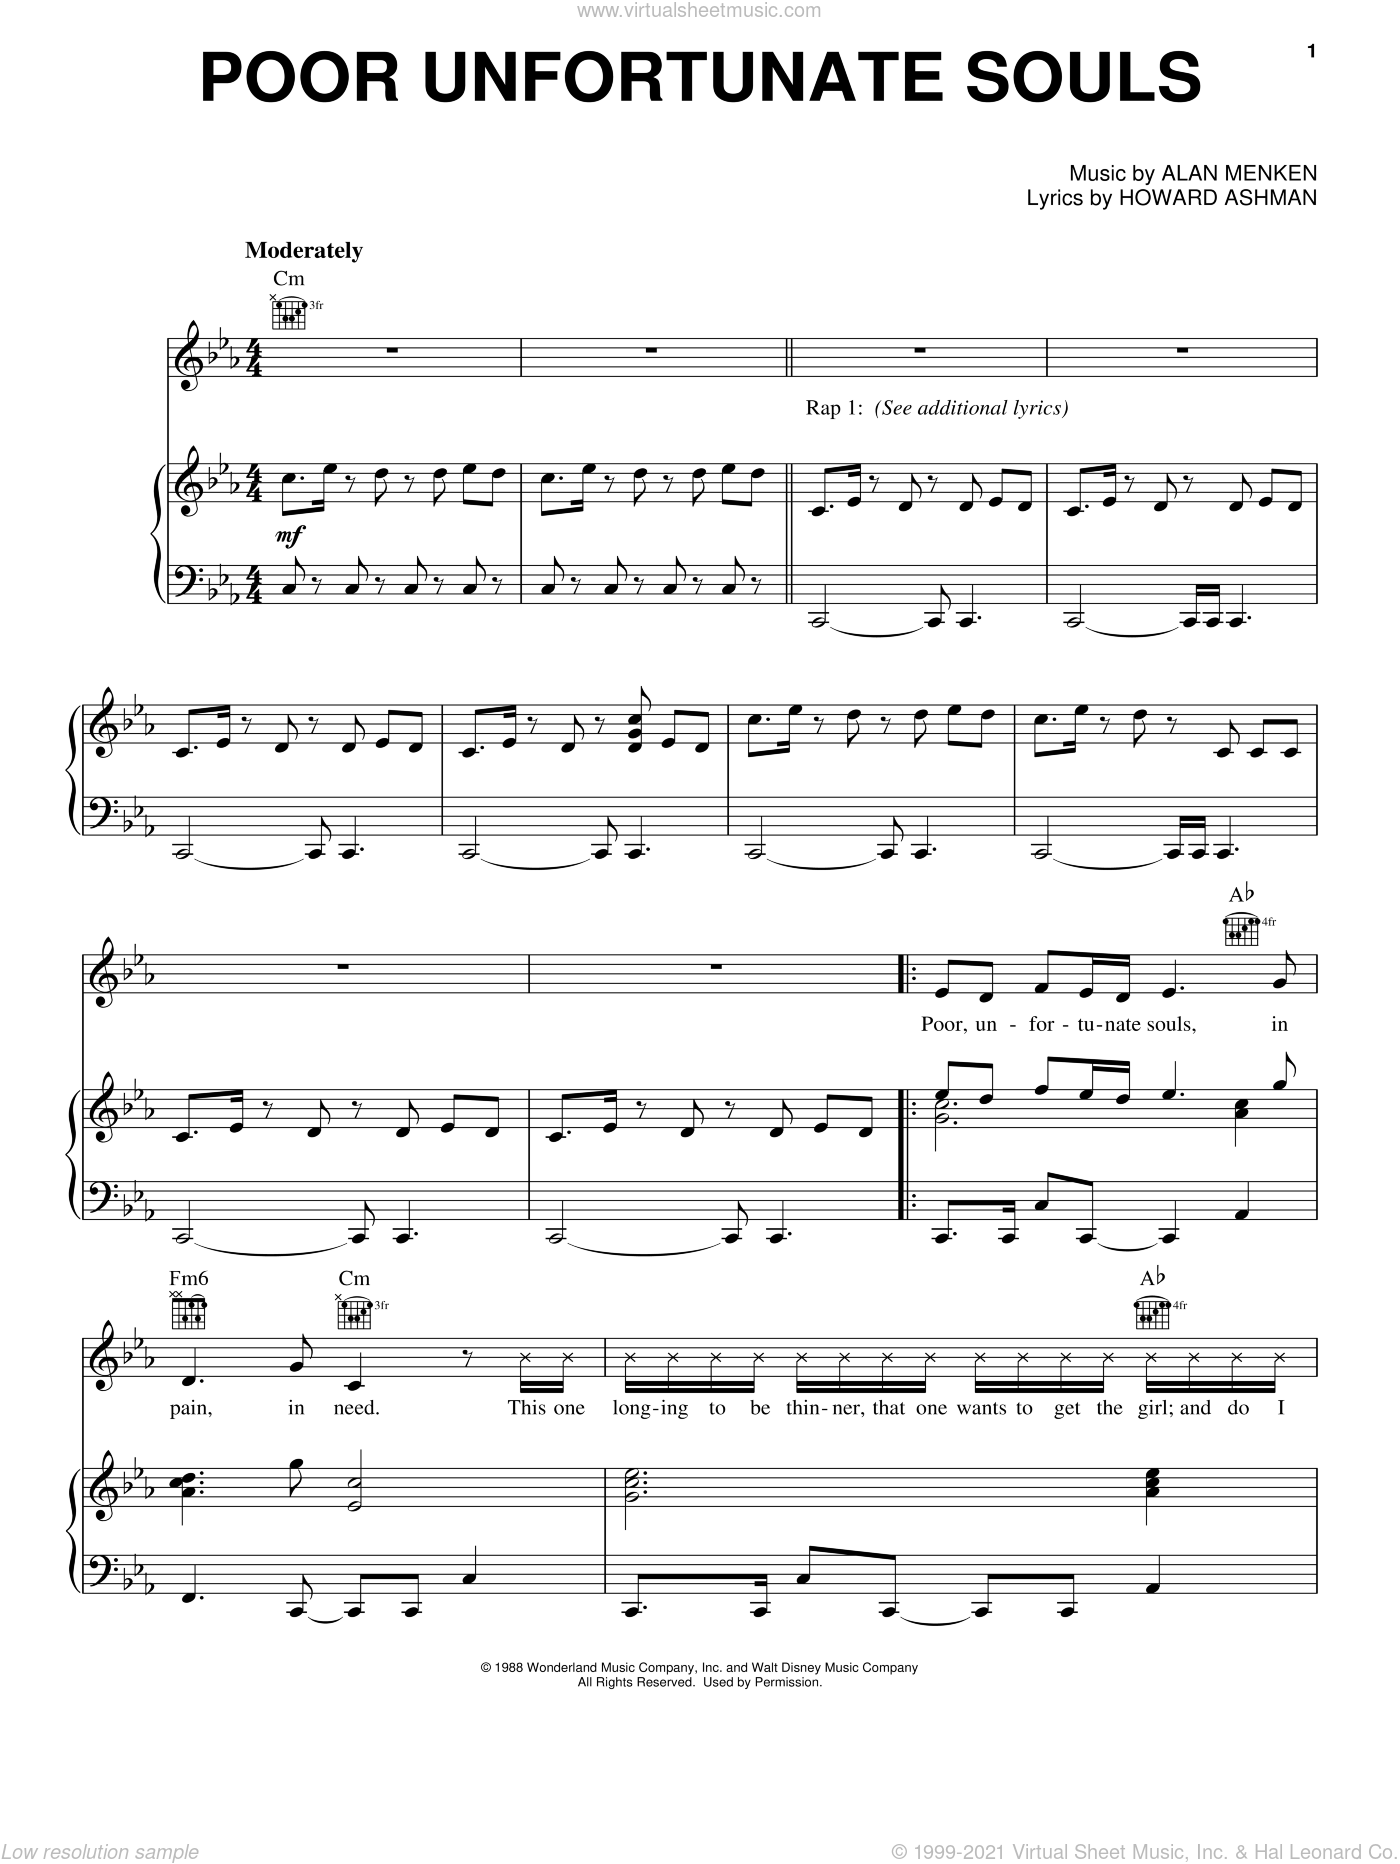 Free sheet music preview of Poor Unfortunate Souls (from Disney's Desc...